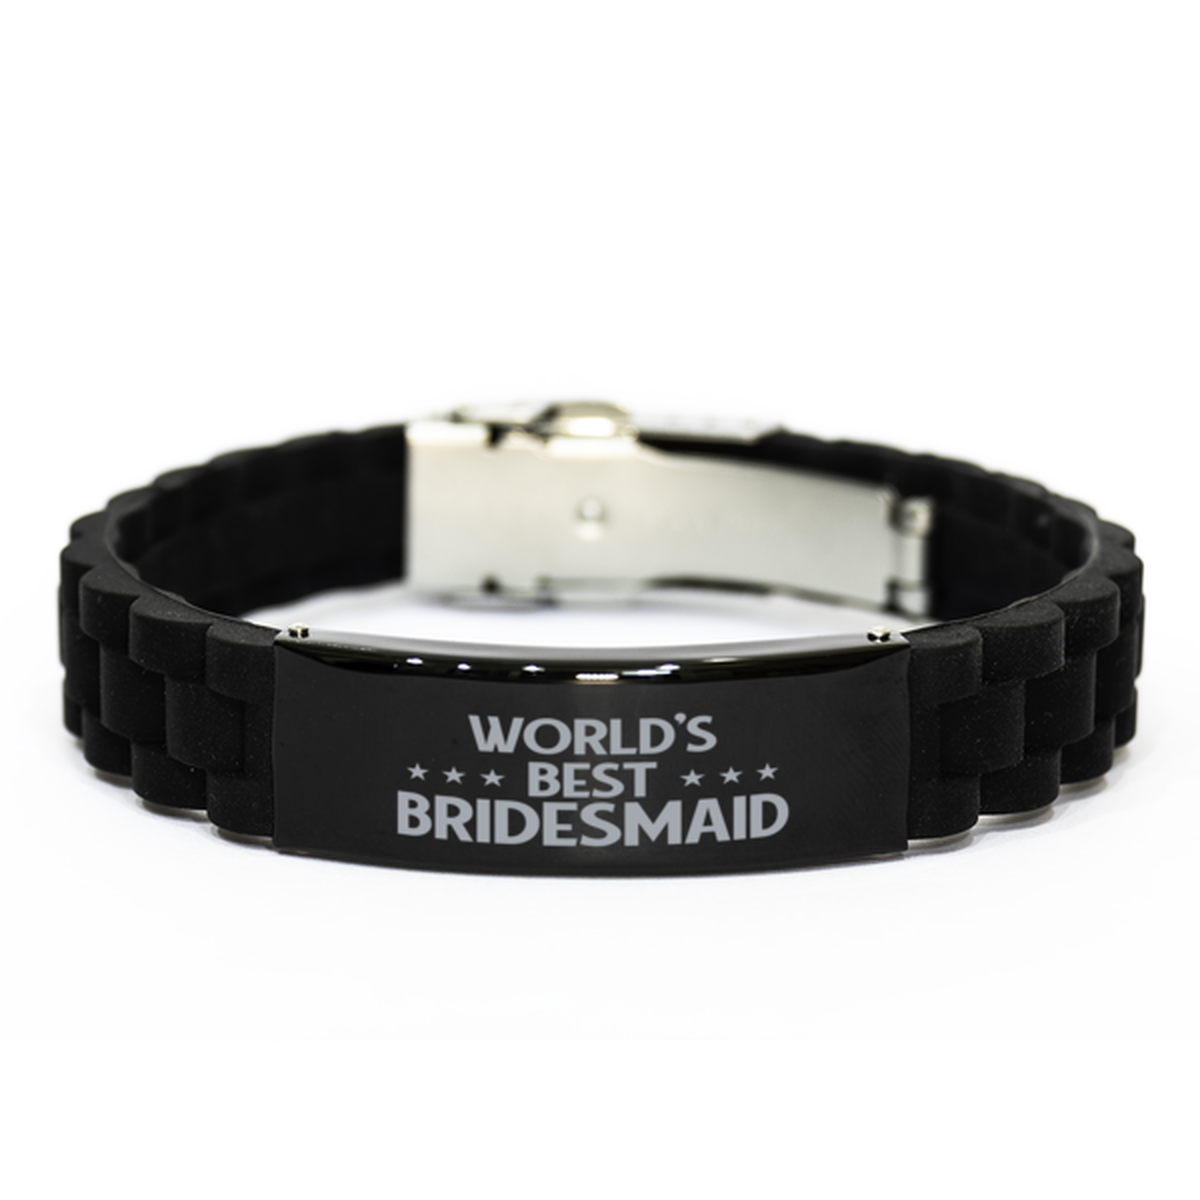 World's Best Bridemaid Gifts, Funny Black Engraved Bracelet For Bridemaid, Family Gifts For Women